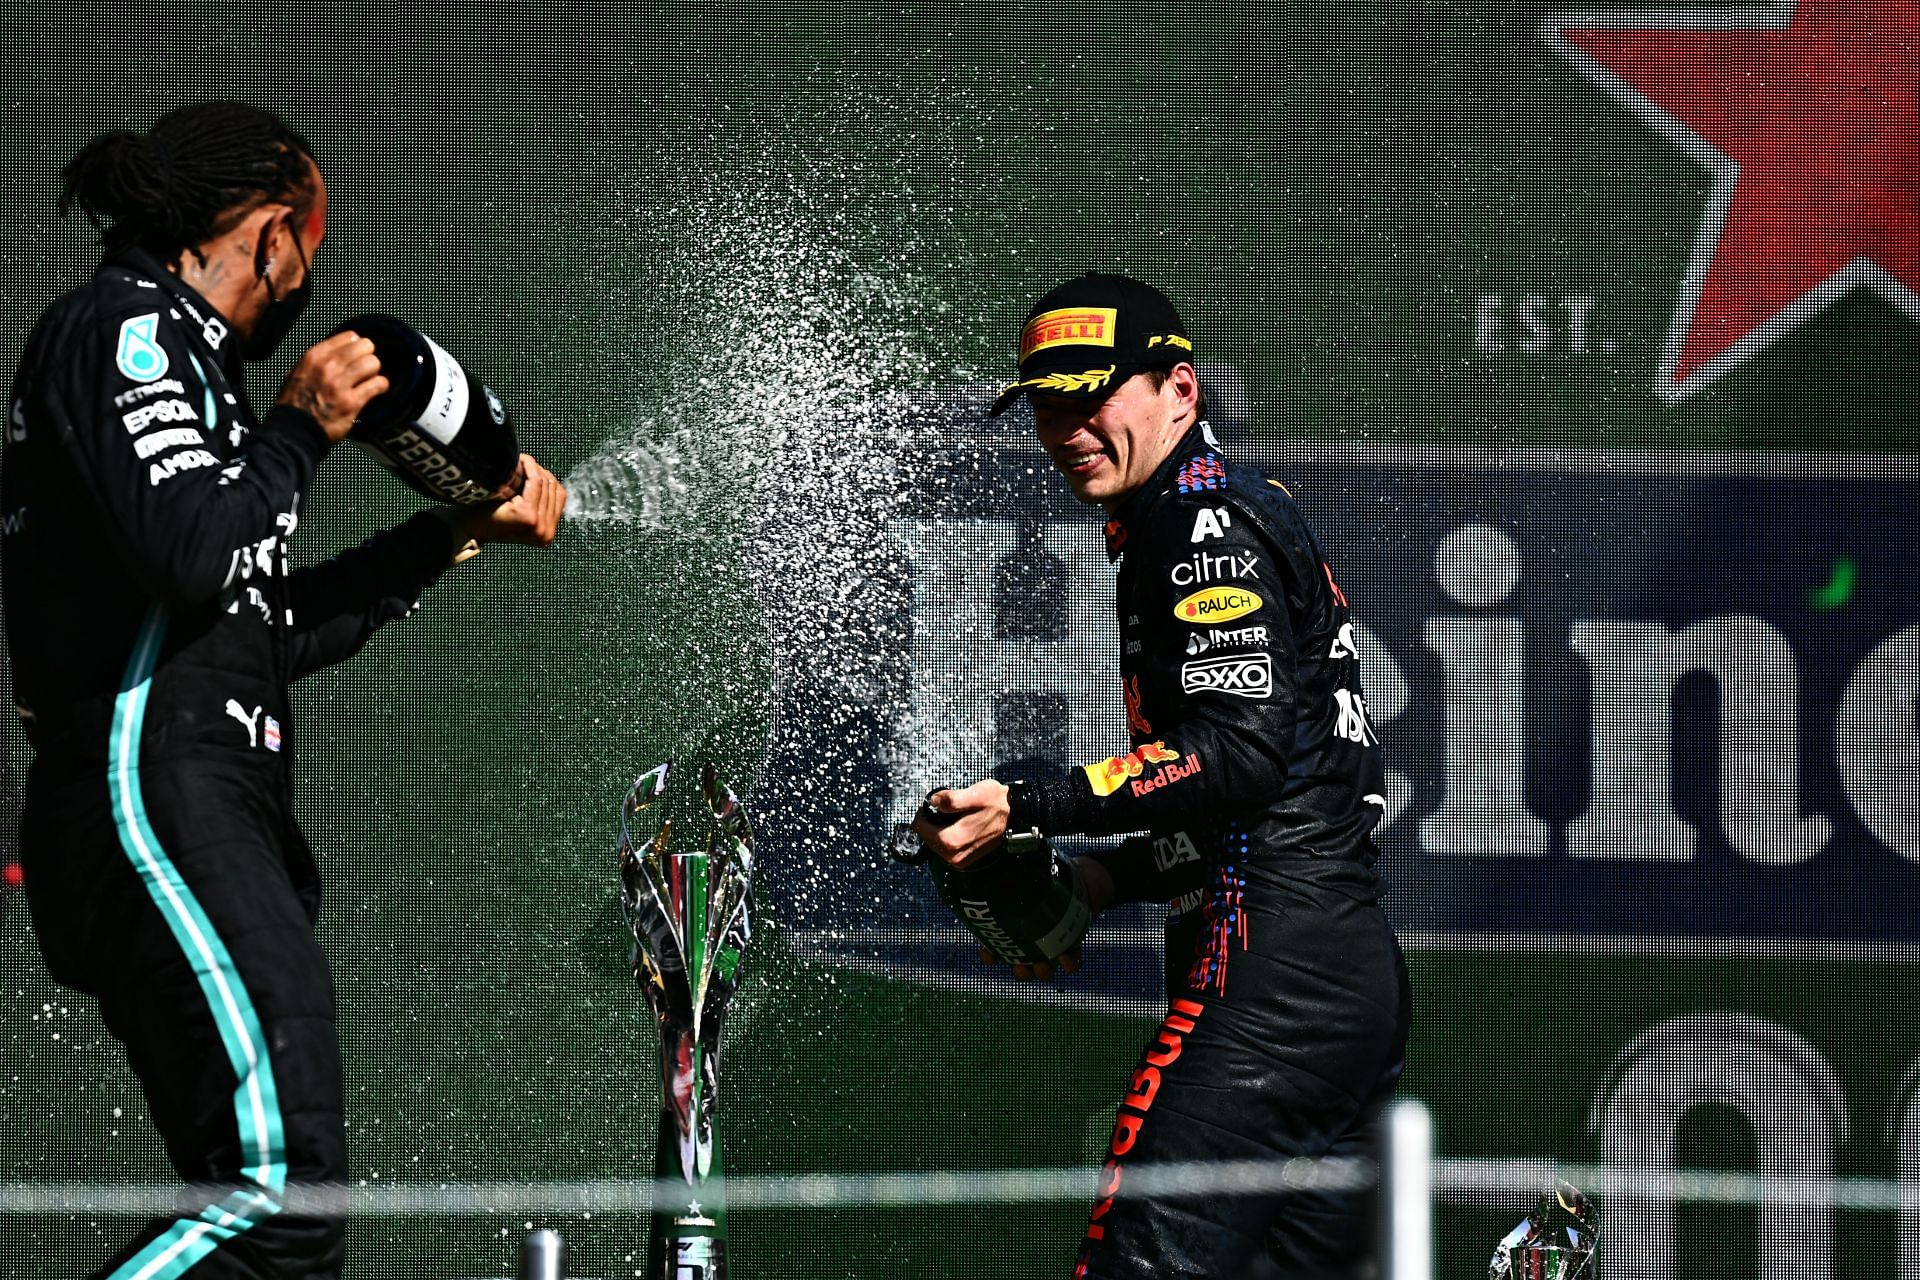 The Championship battle between Lewis Hamitlm and Max Verstappen is the closest in recent years.